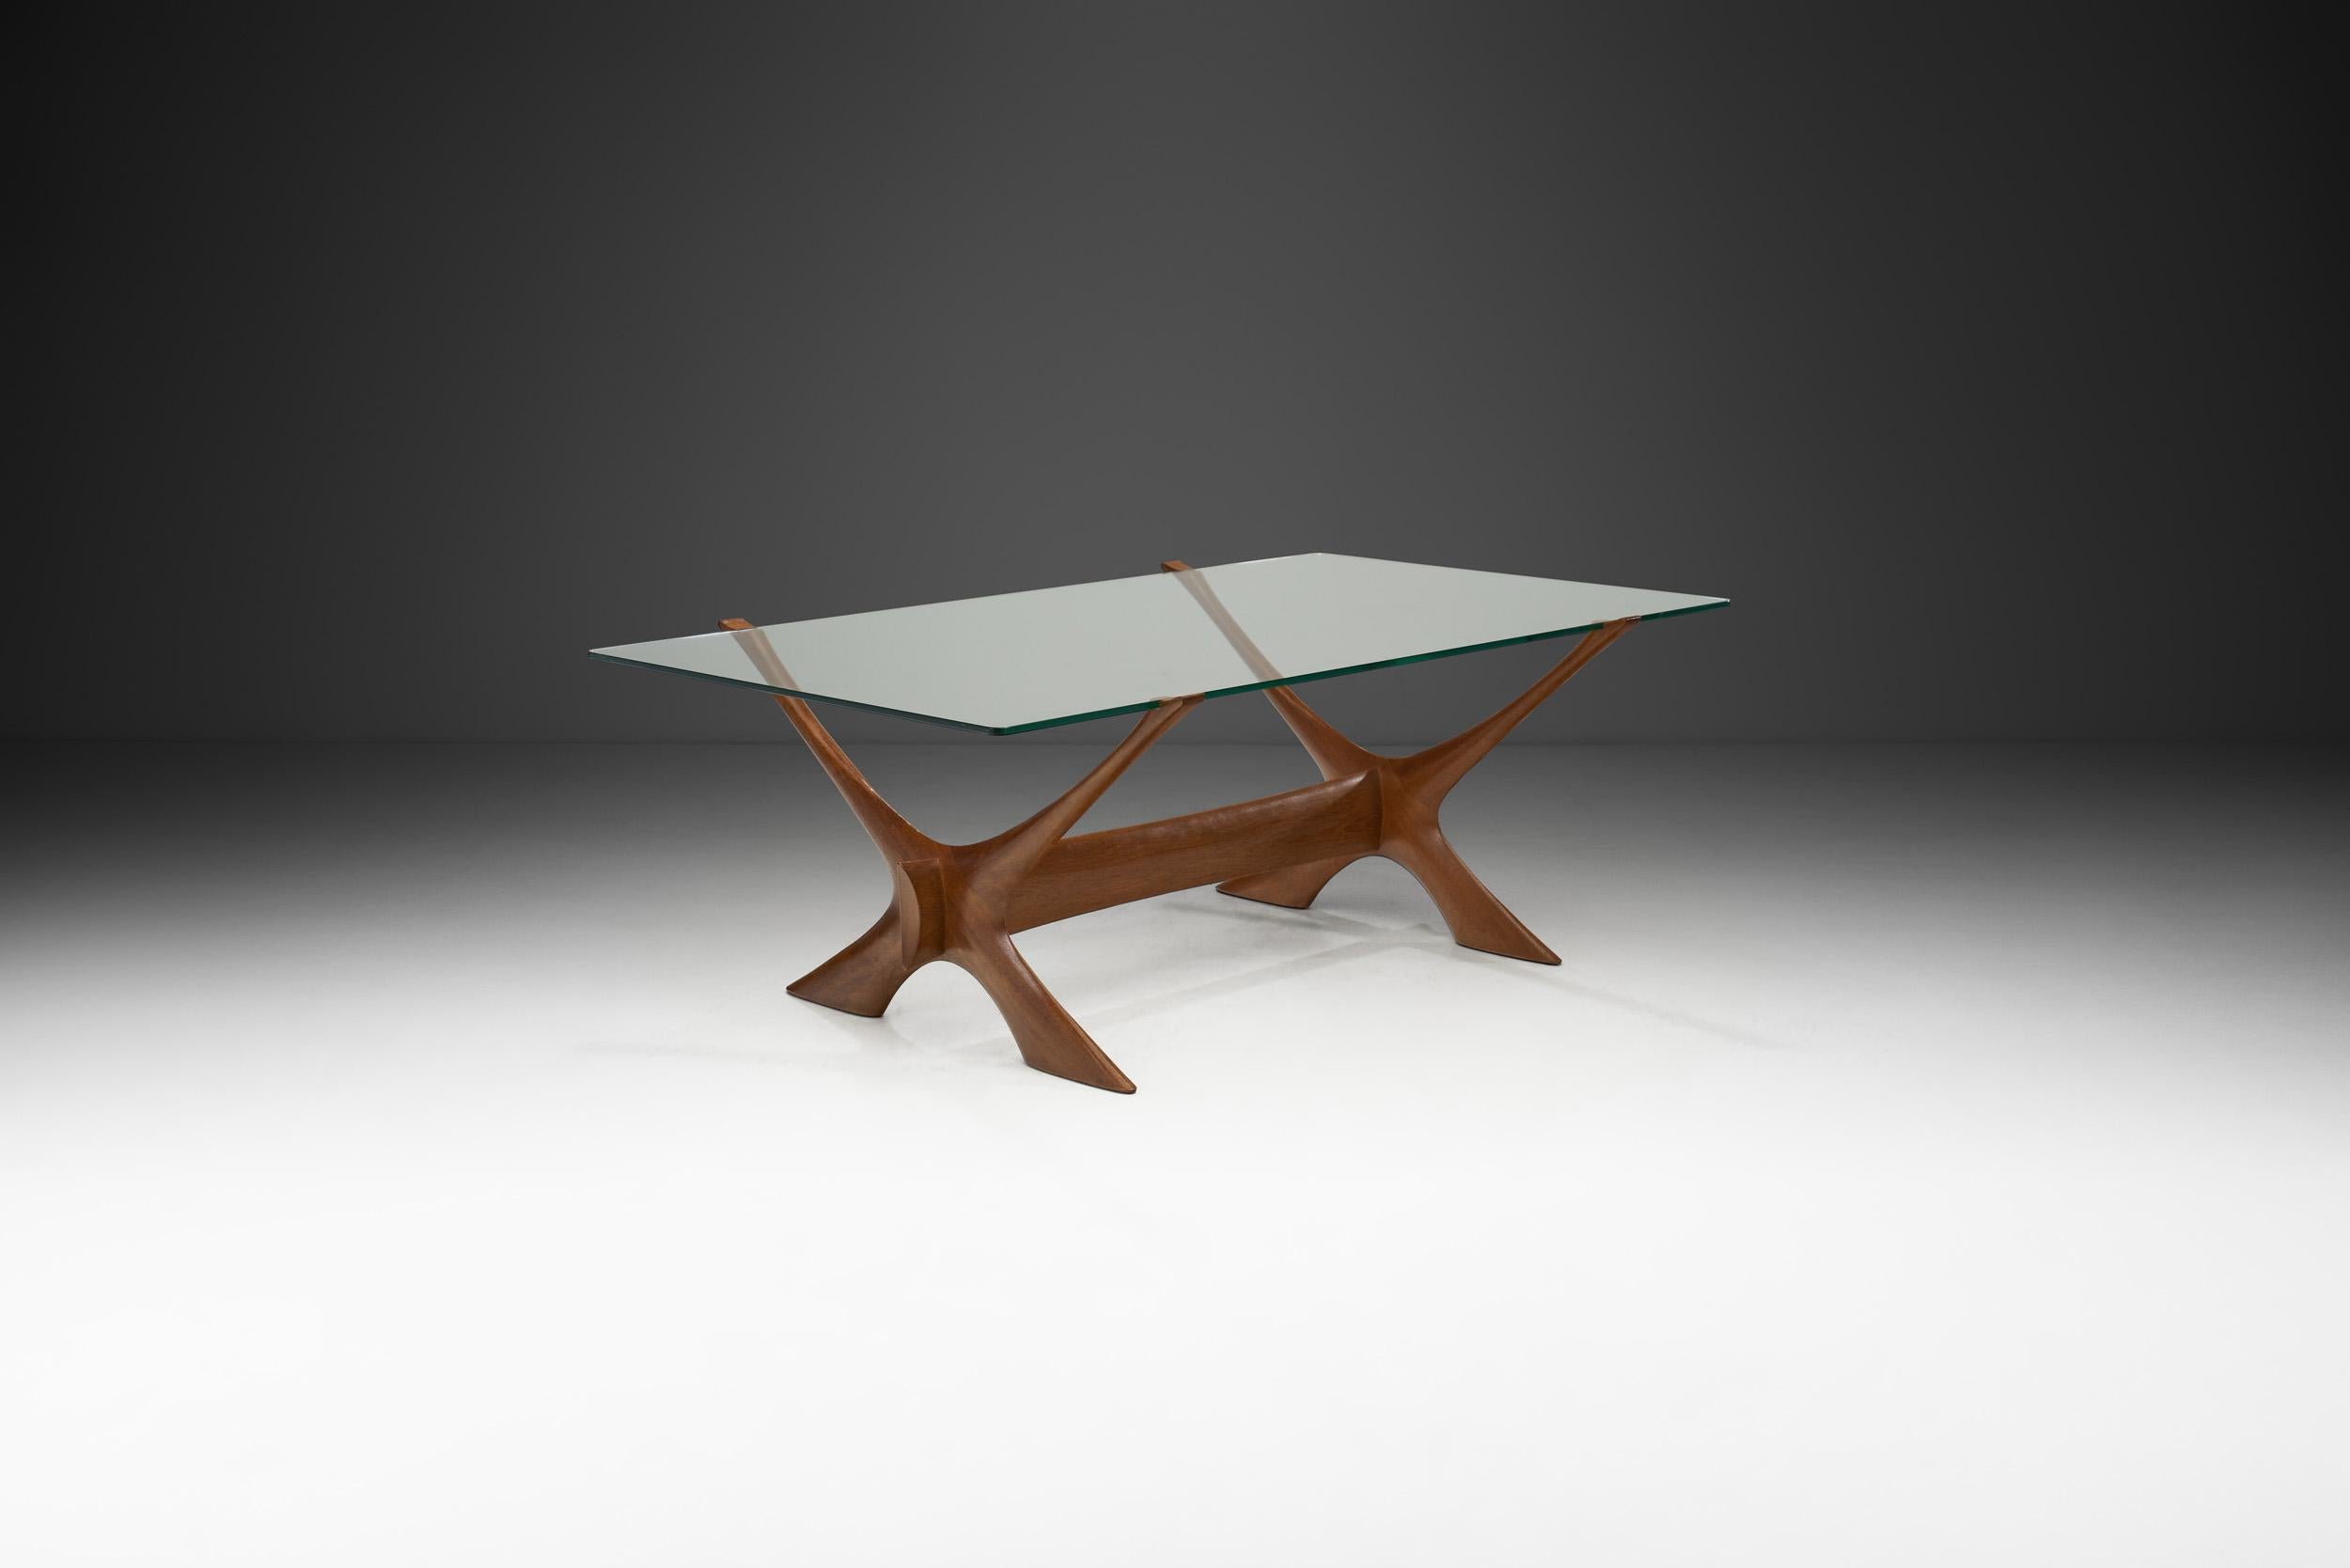 Swedish designer, Fredrik Schriever-Abeln’s designs have become quite sought after only in the past years. This is in part due to the beloved design of this “Condor” table being misattributed to Illum Wikkelsø until recently.

The distinctive “X”